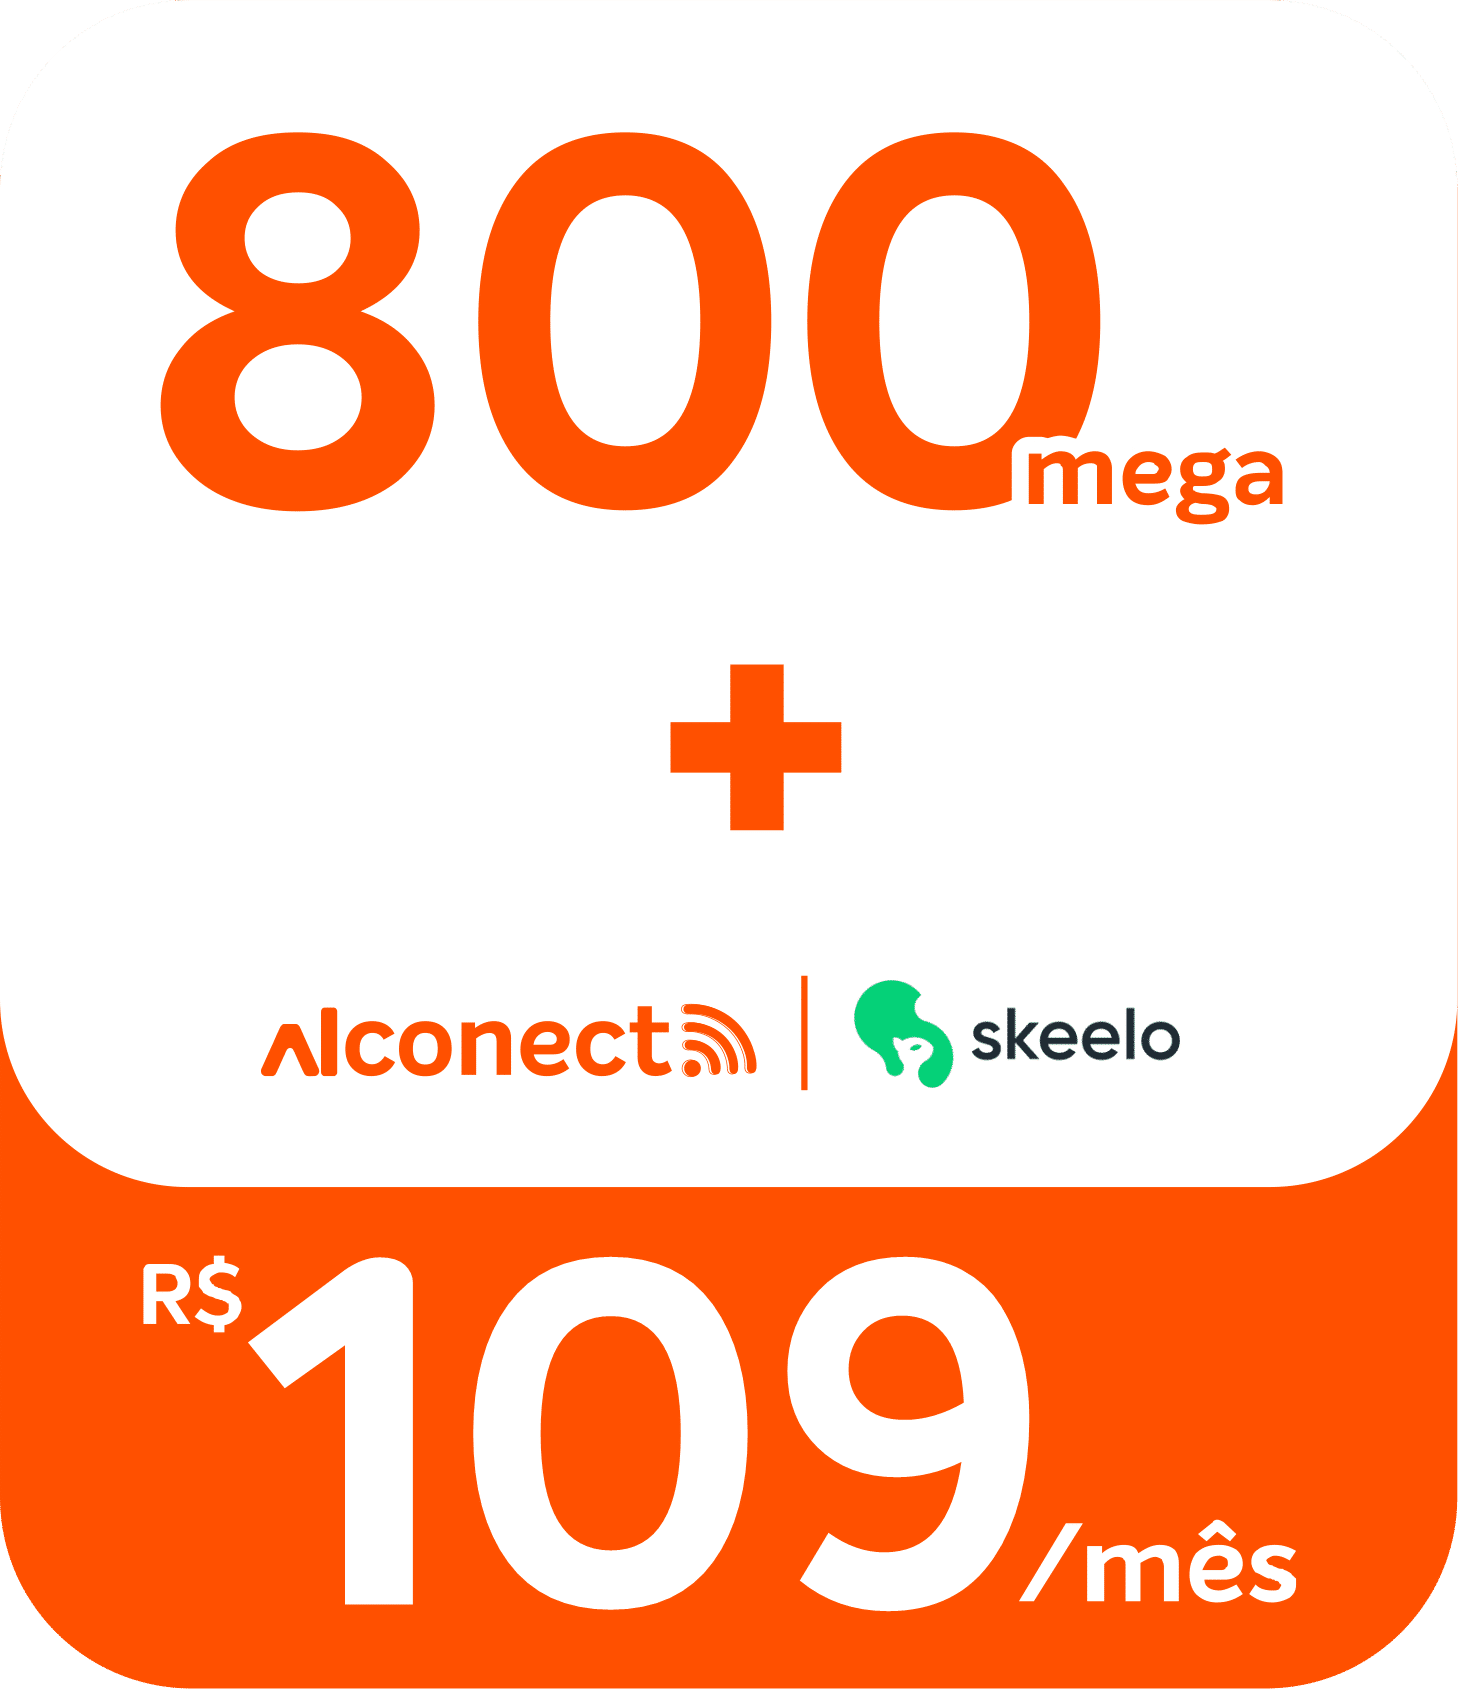 ALCONECT 800 MB R$ 109,00